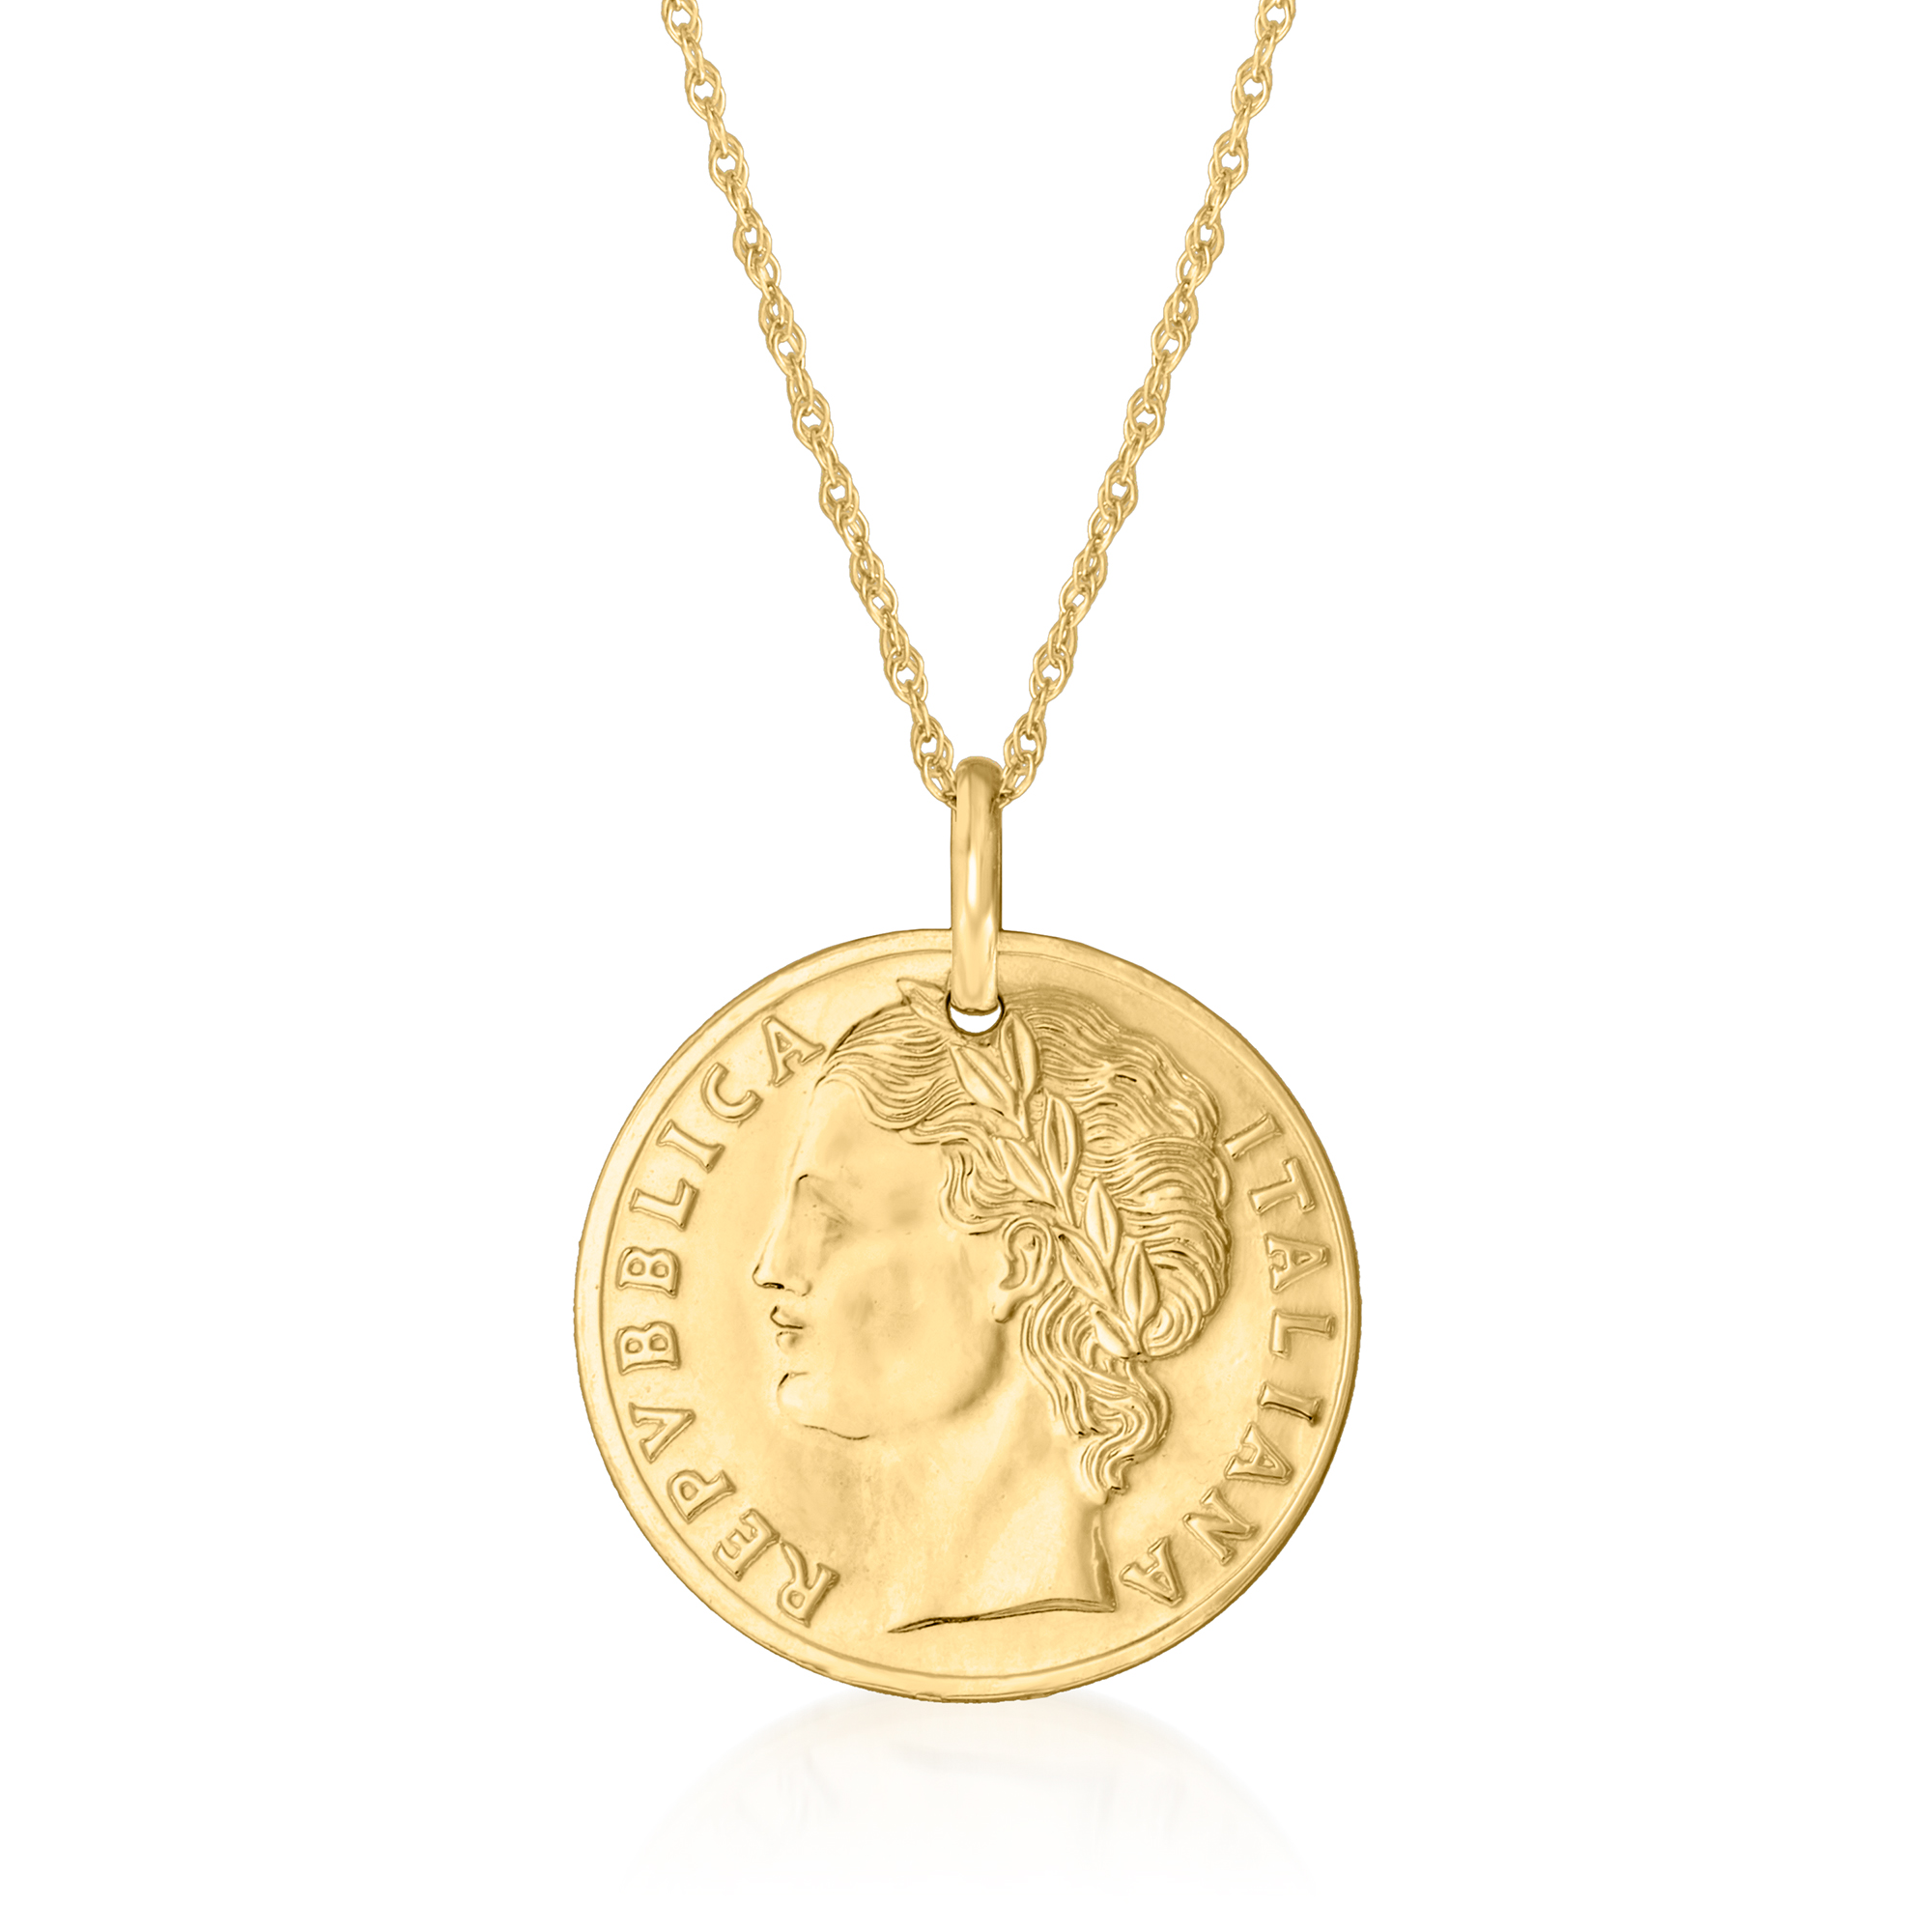 Buy 14 K Solid Gold, Solid Italian Gold, Roman, Italian Coin Charms, Roman  Coins, Roman Coin Pendants, Italian Coin Charms Online in India - Etsy